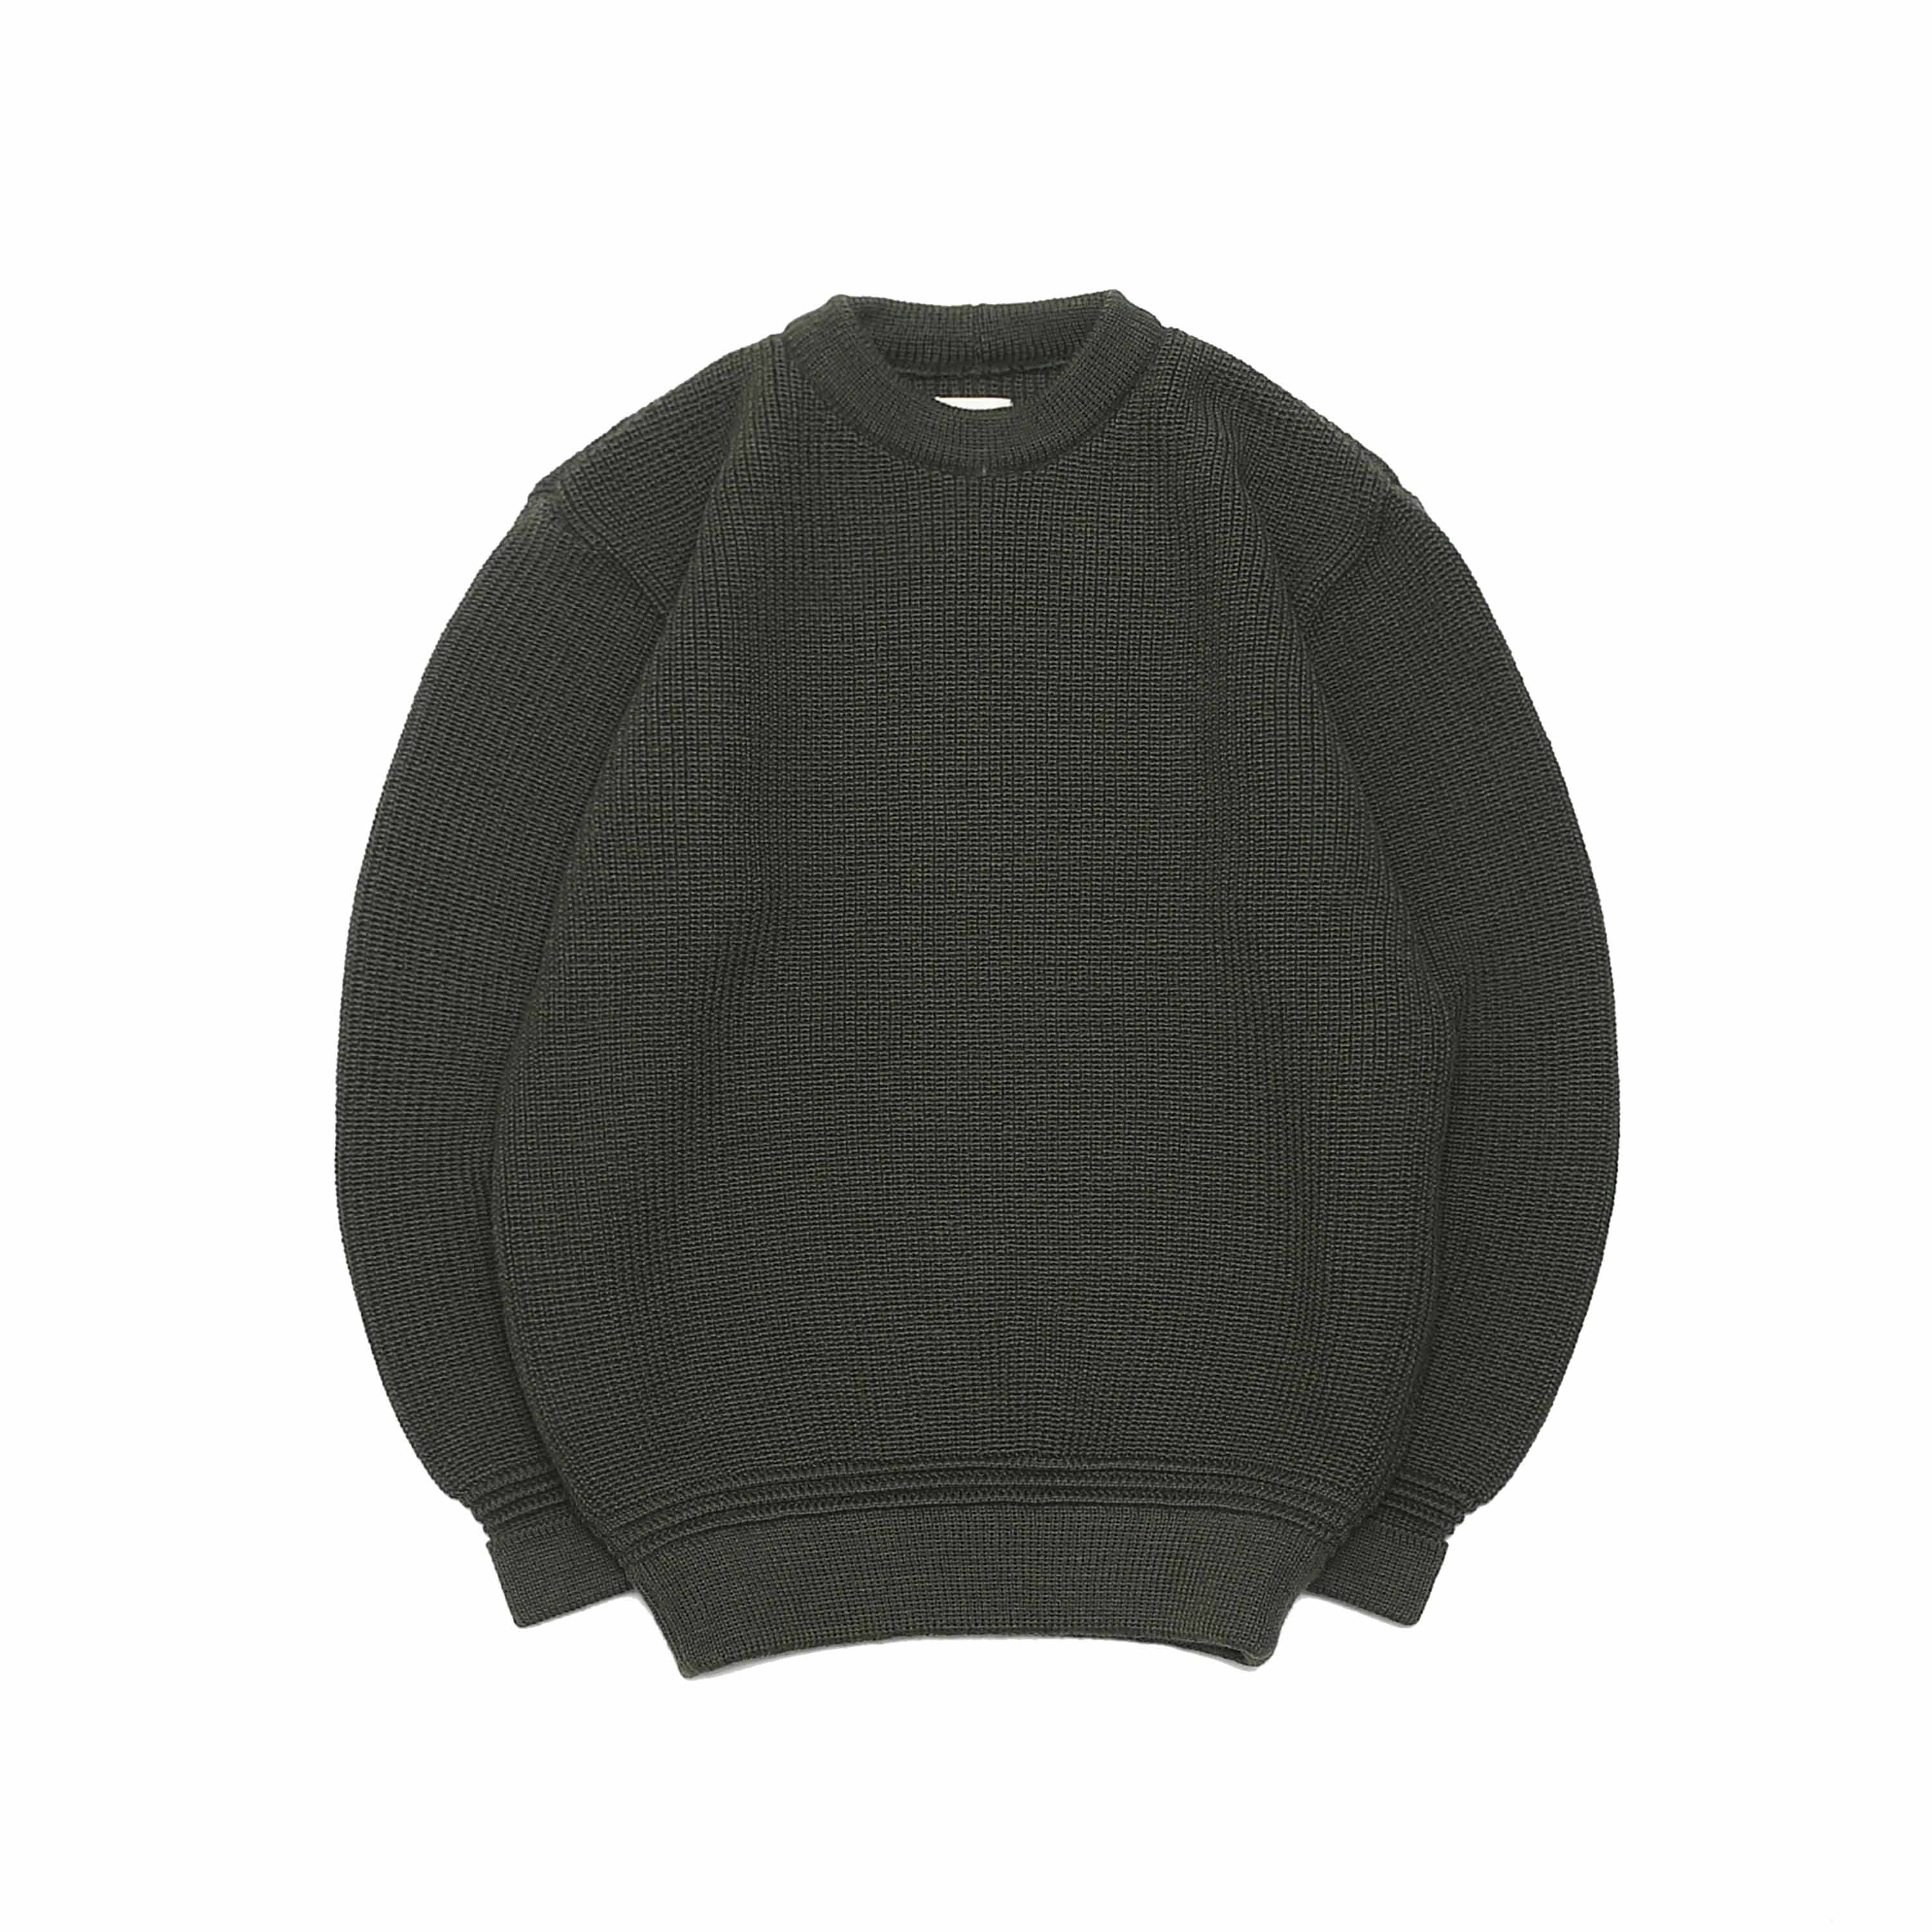 WOOL SWEATER - OLIVE